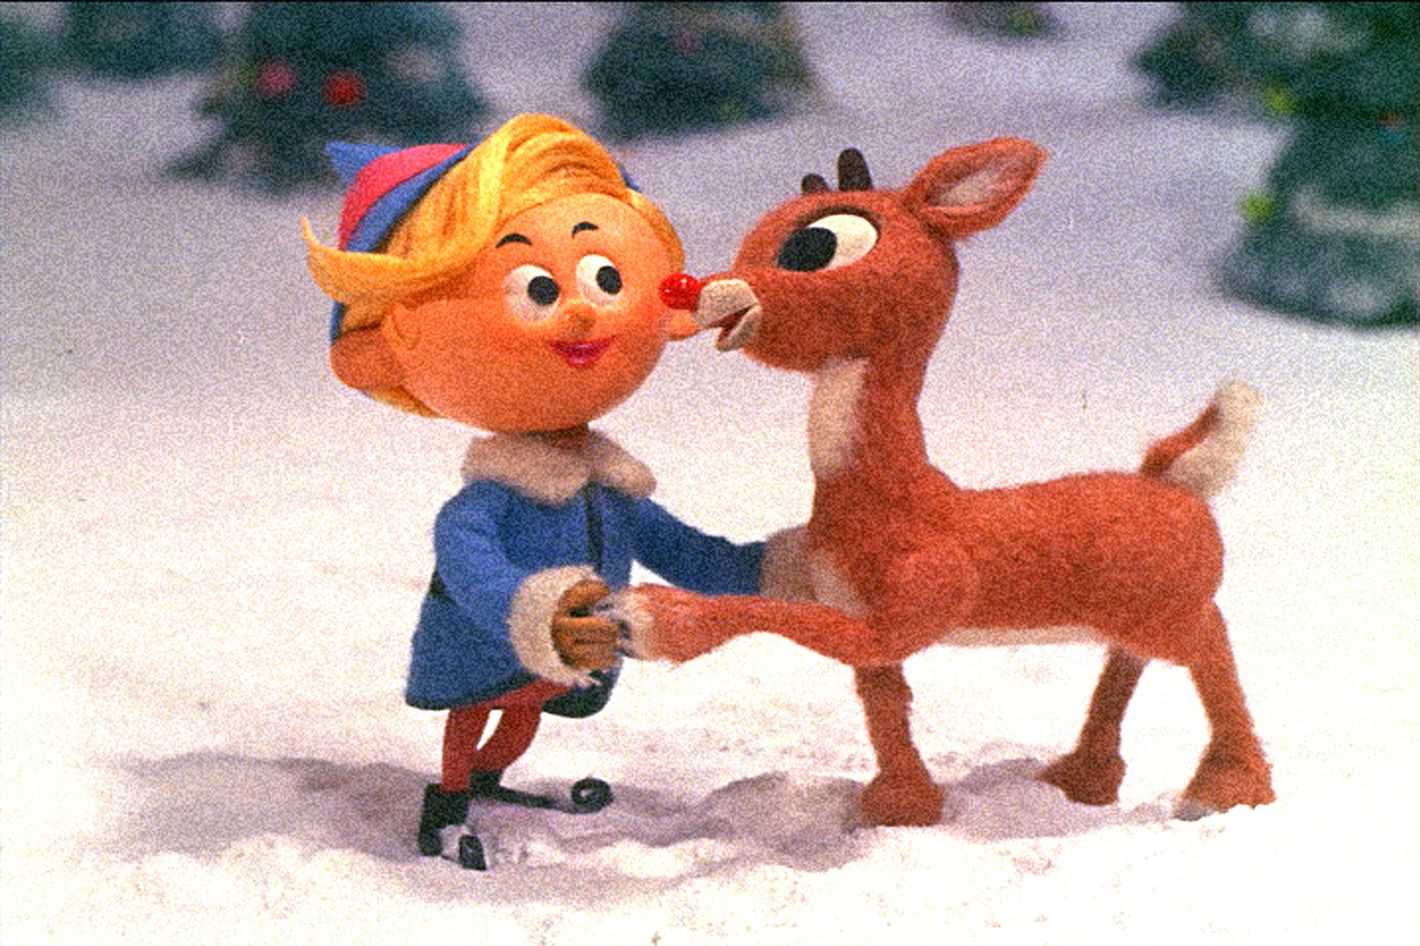 The Gay Subtext of Rudolph the Red-Nosed Reindeer